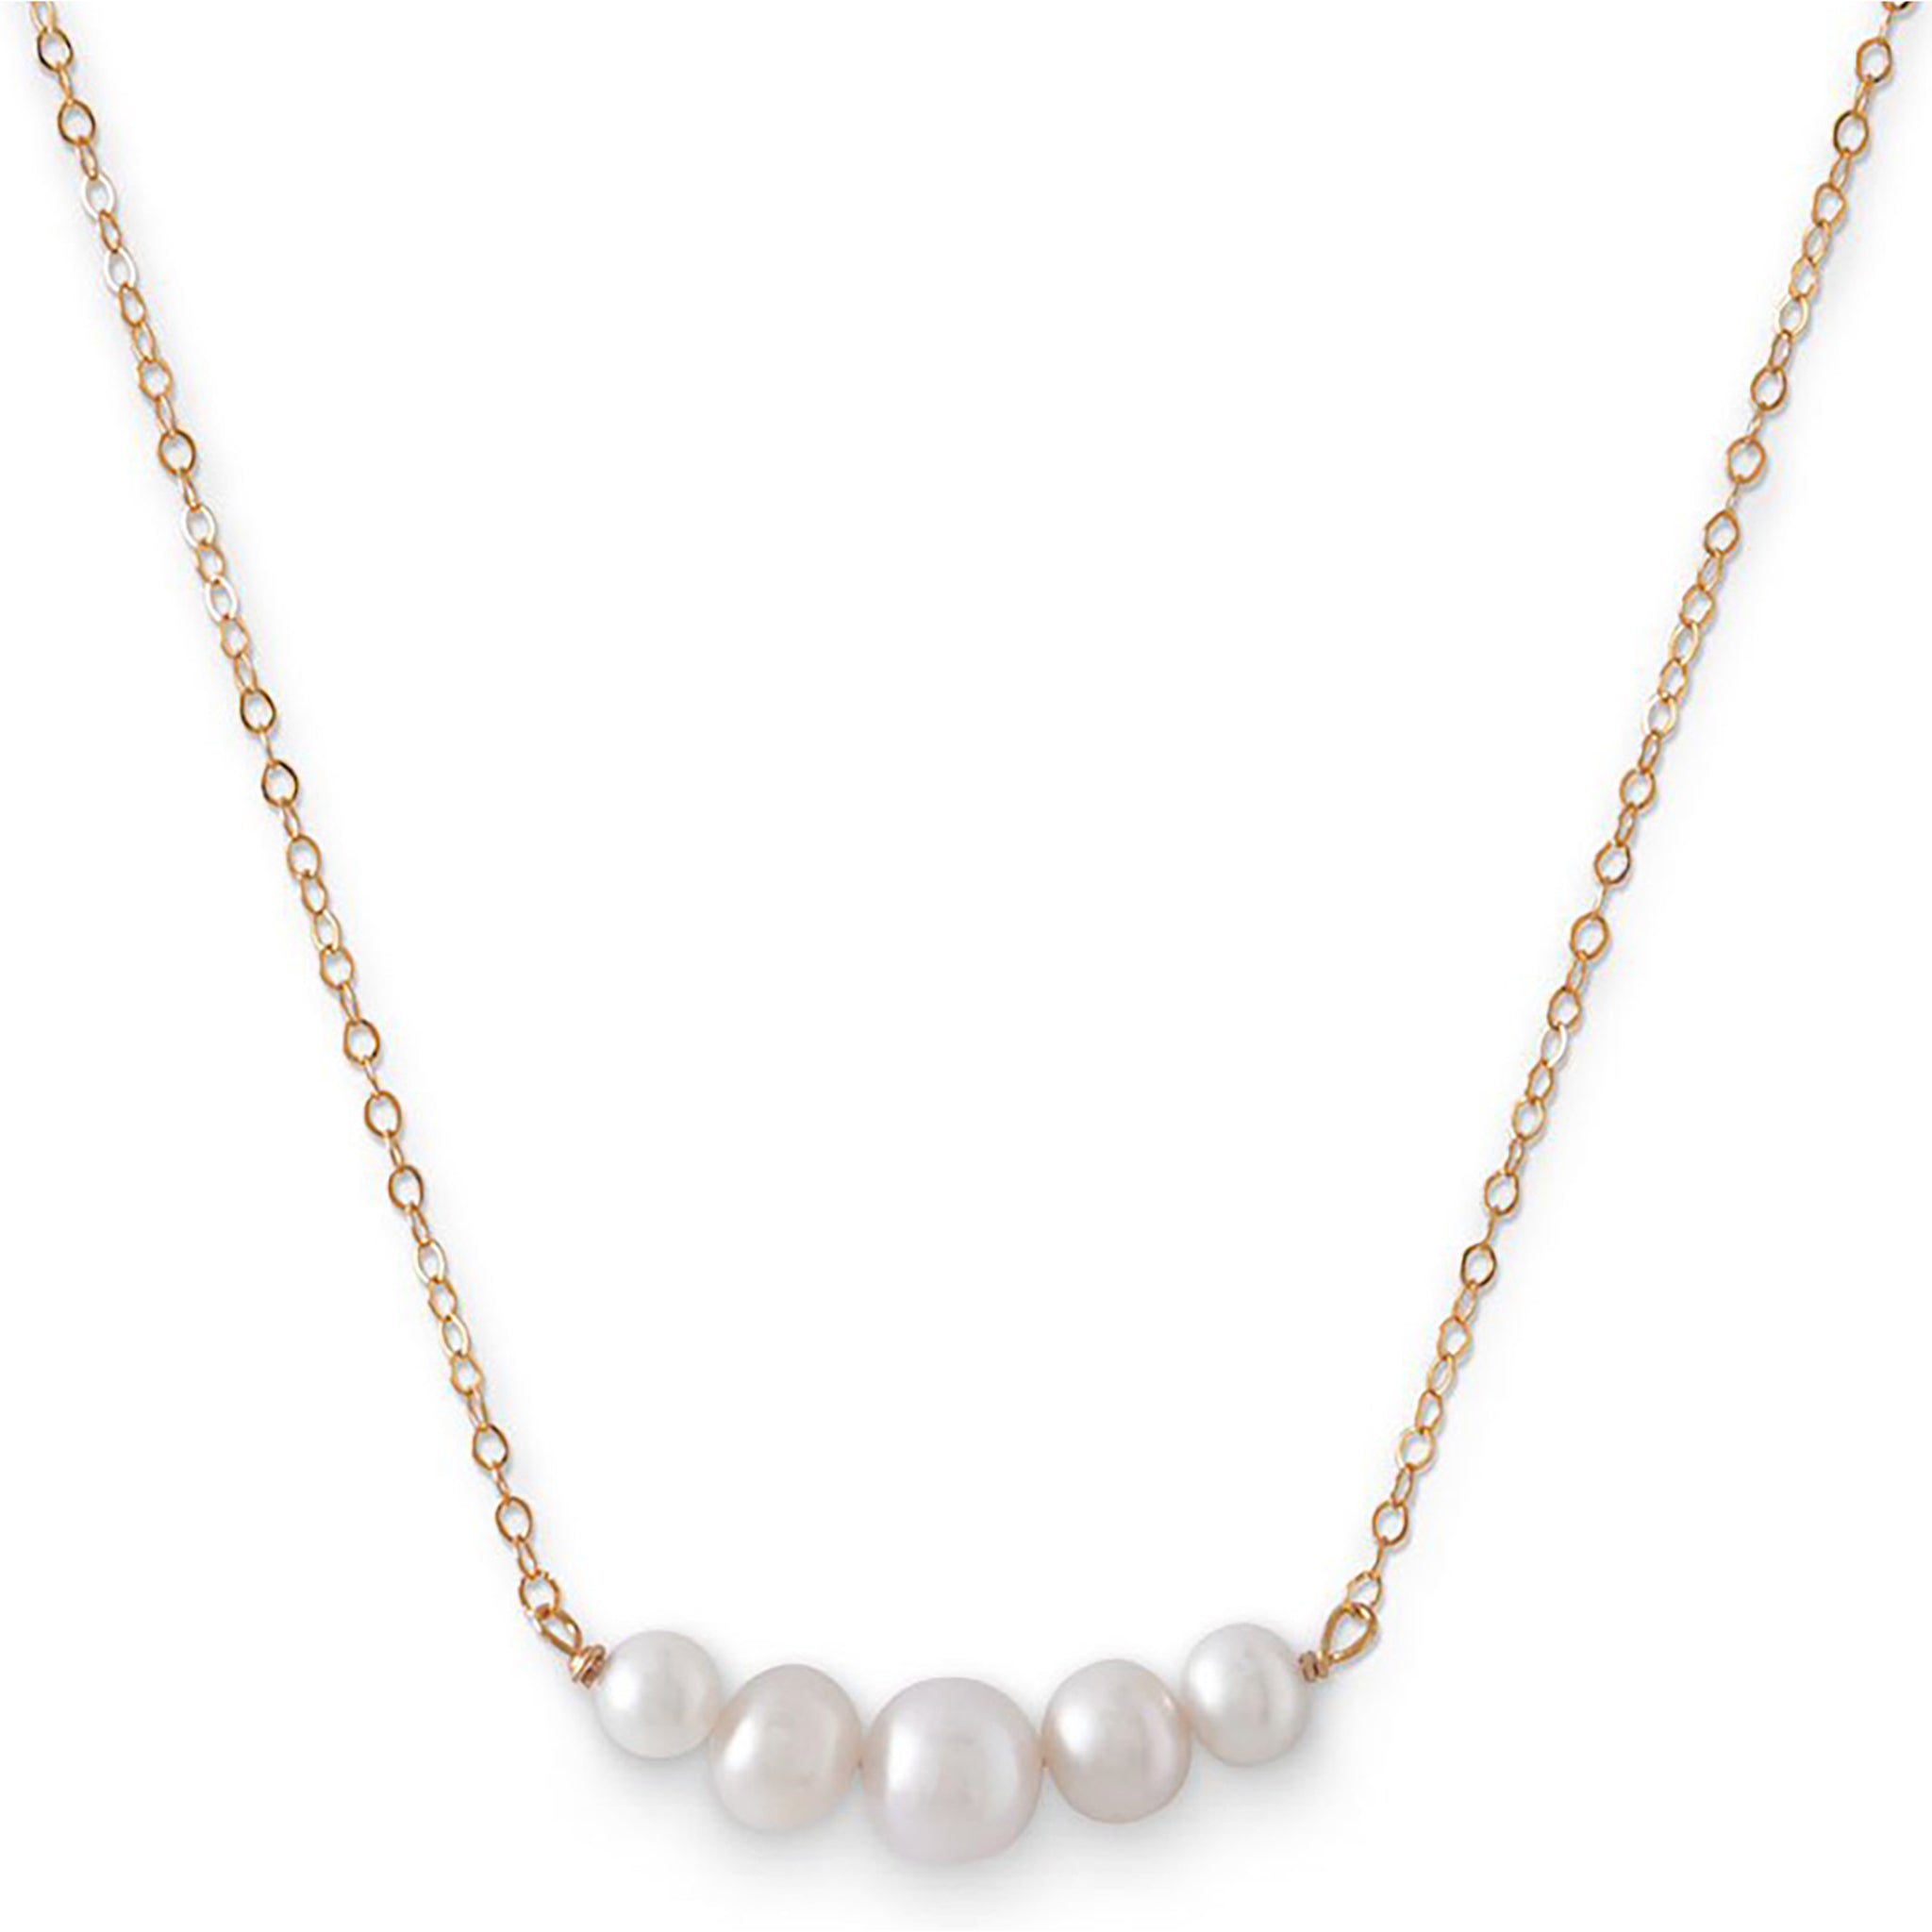 Near Round Freshwater Pearl Necklace